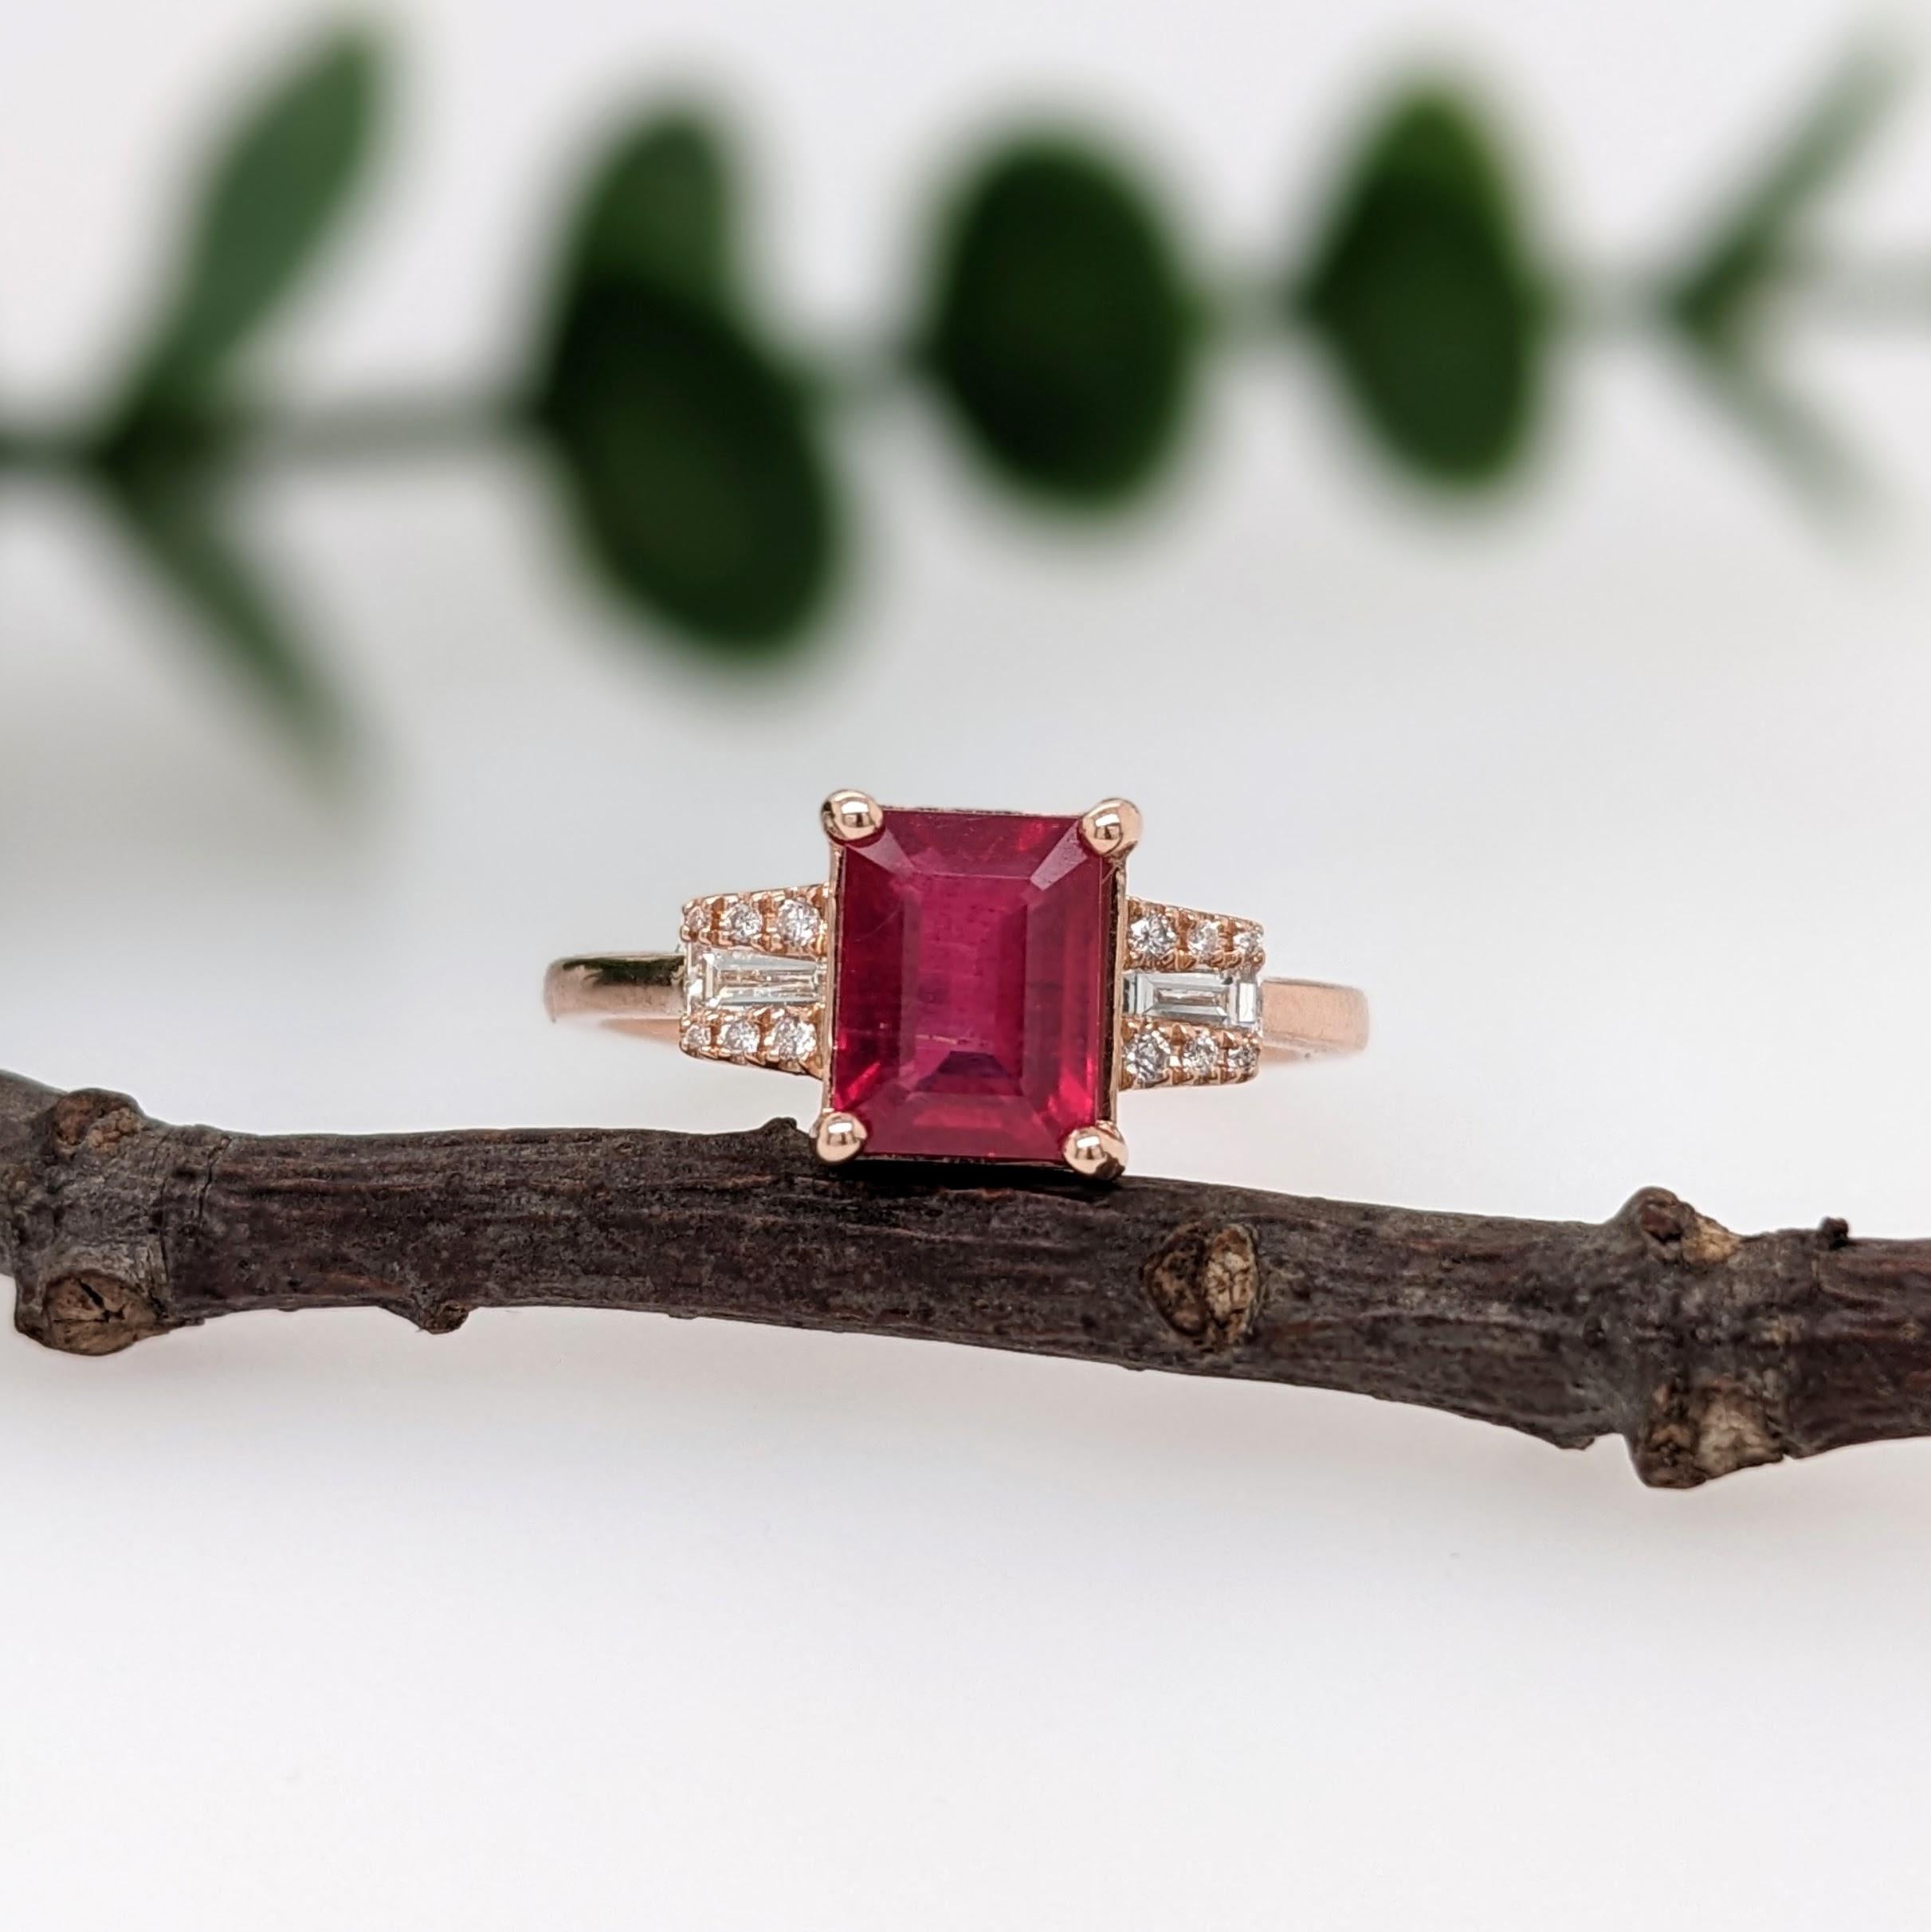 Enjoy this new ring design featuring a saturated pigeon blood red ruby in 14k rose gold with baguette and round diamond accents. A stunning ring perfect for an eye catching engagement or anniversary. This ring also makes a beautiful birthstone ring